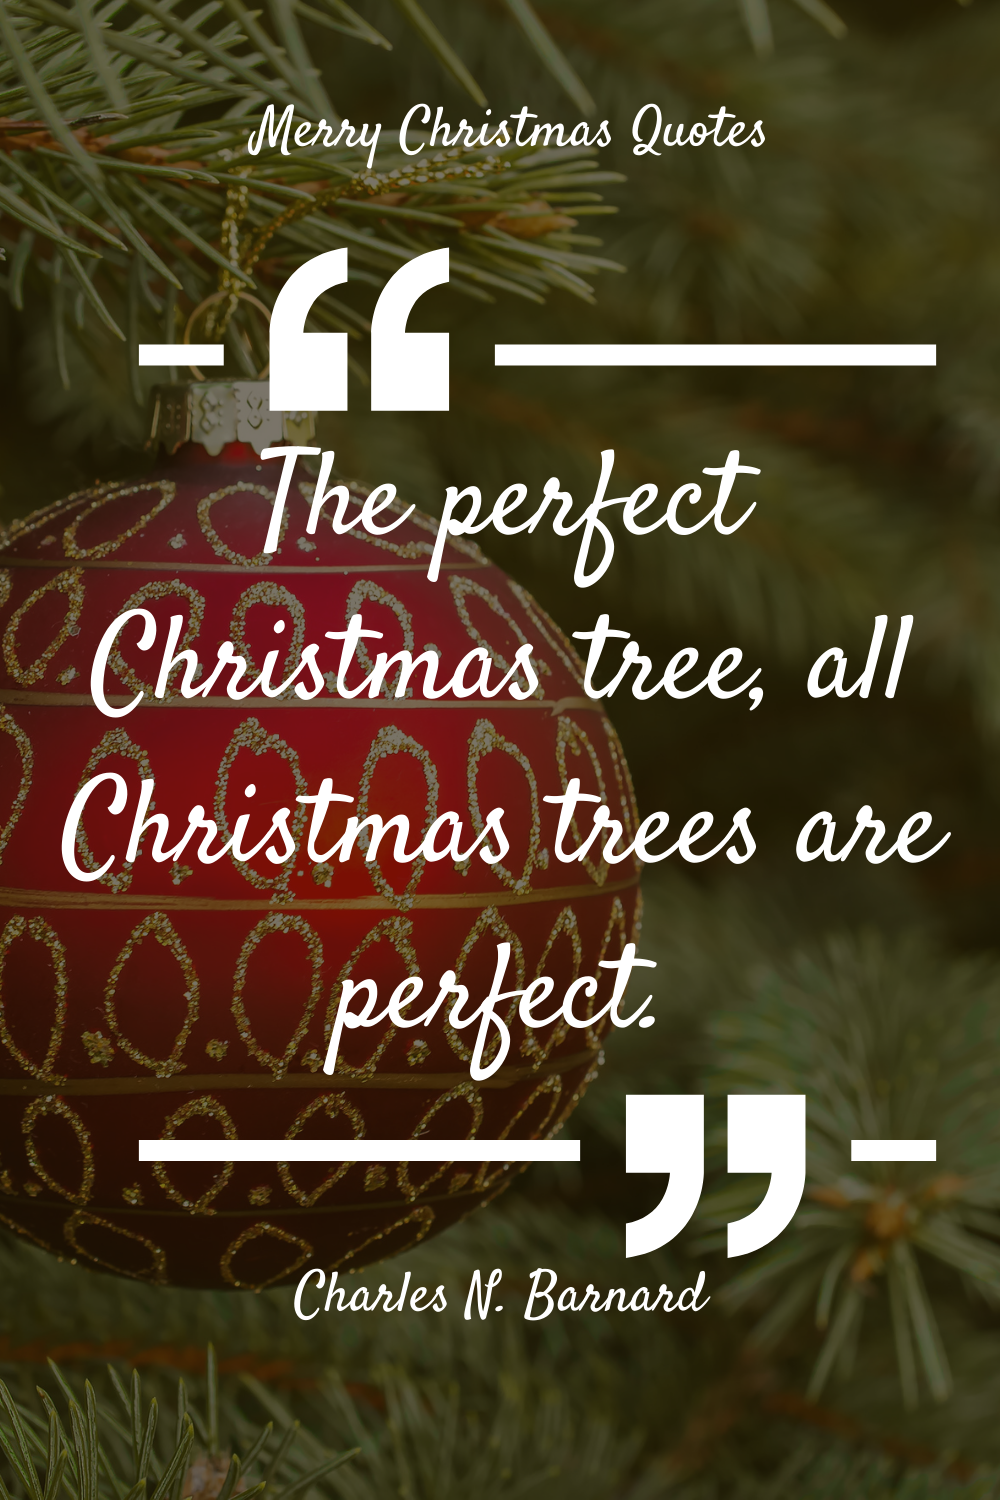 61 Top Christmas Tree Quotes with Images 2021 - Merry Christmas Quotes